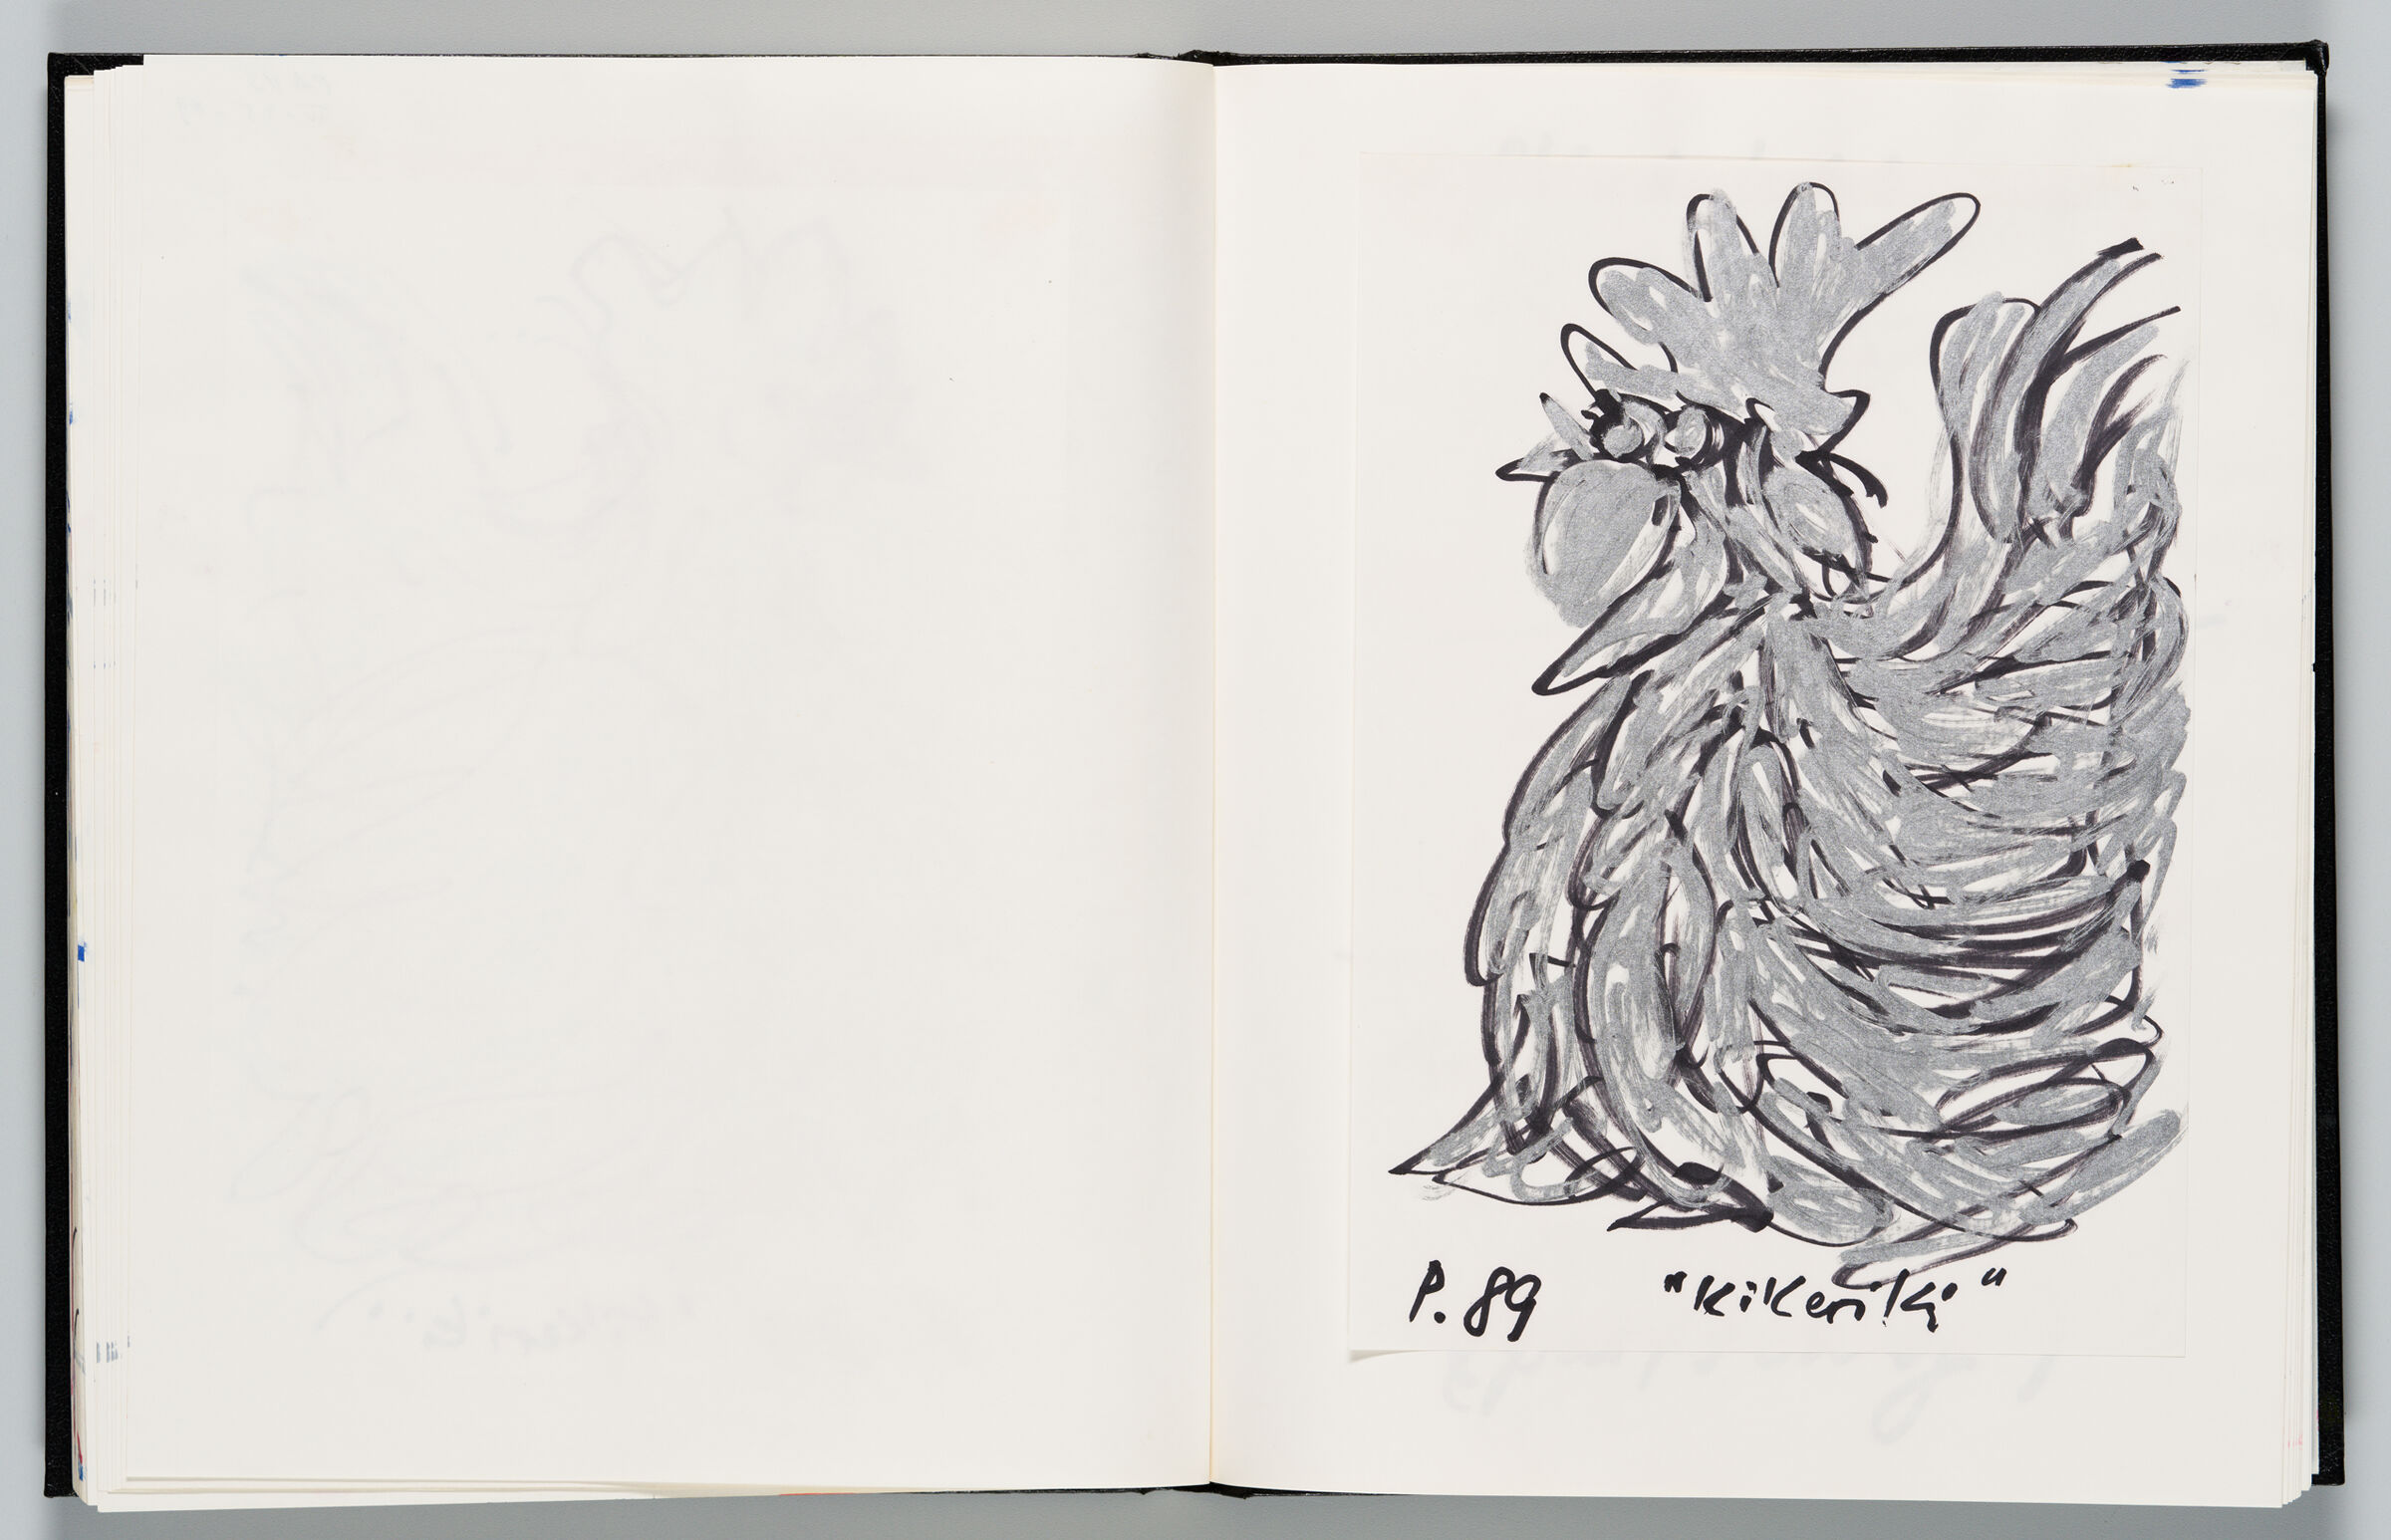 Untitled (Blank, Left Page); Untitled (Drawing Of Rooster On Paper, Right Page)